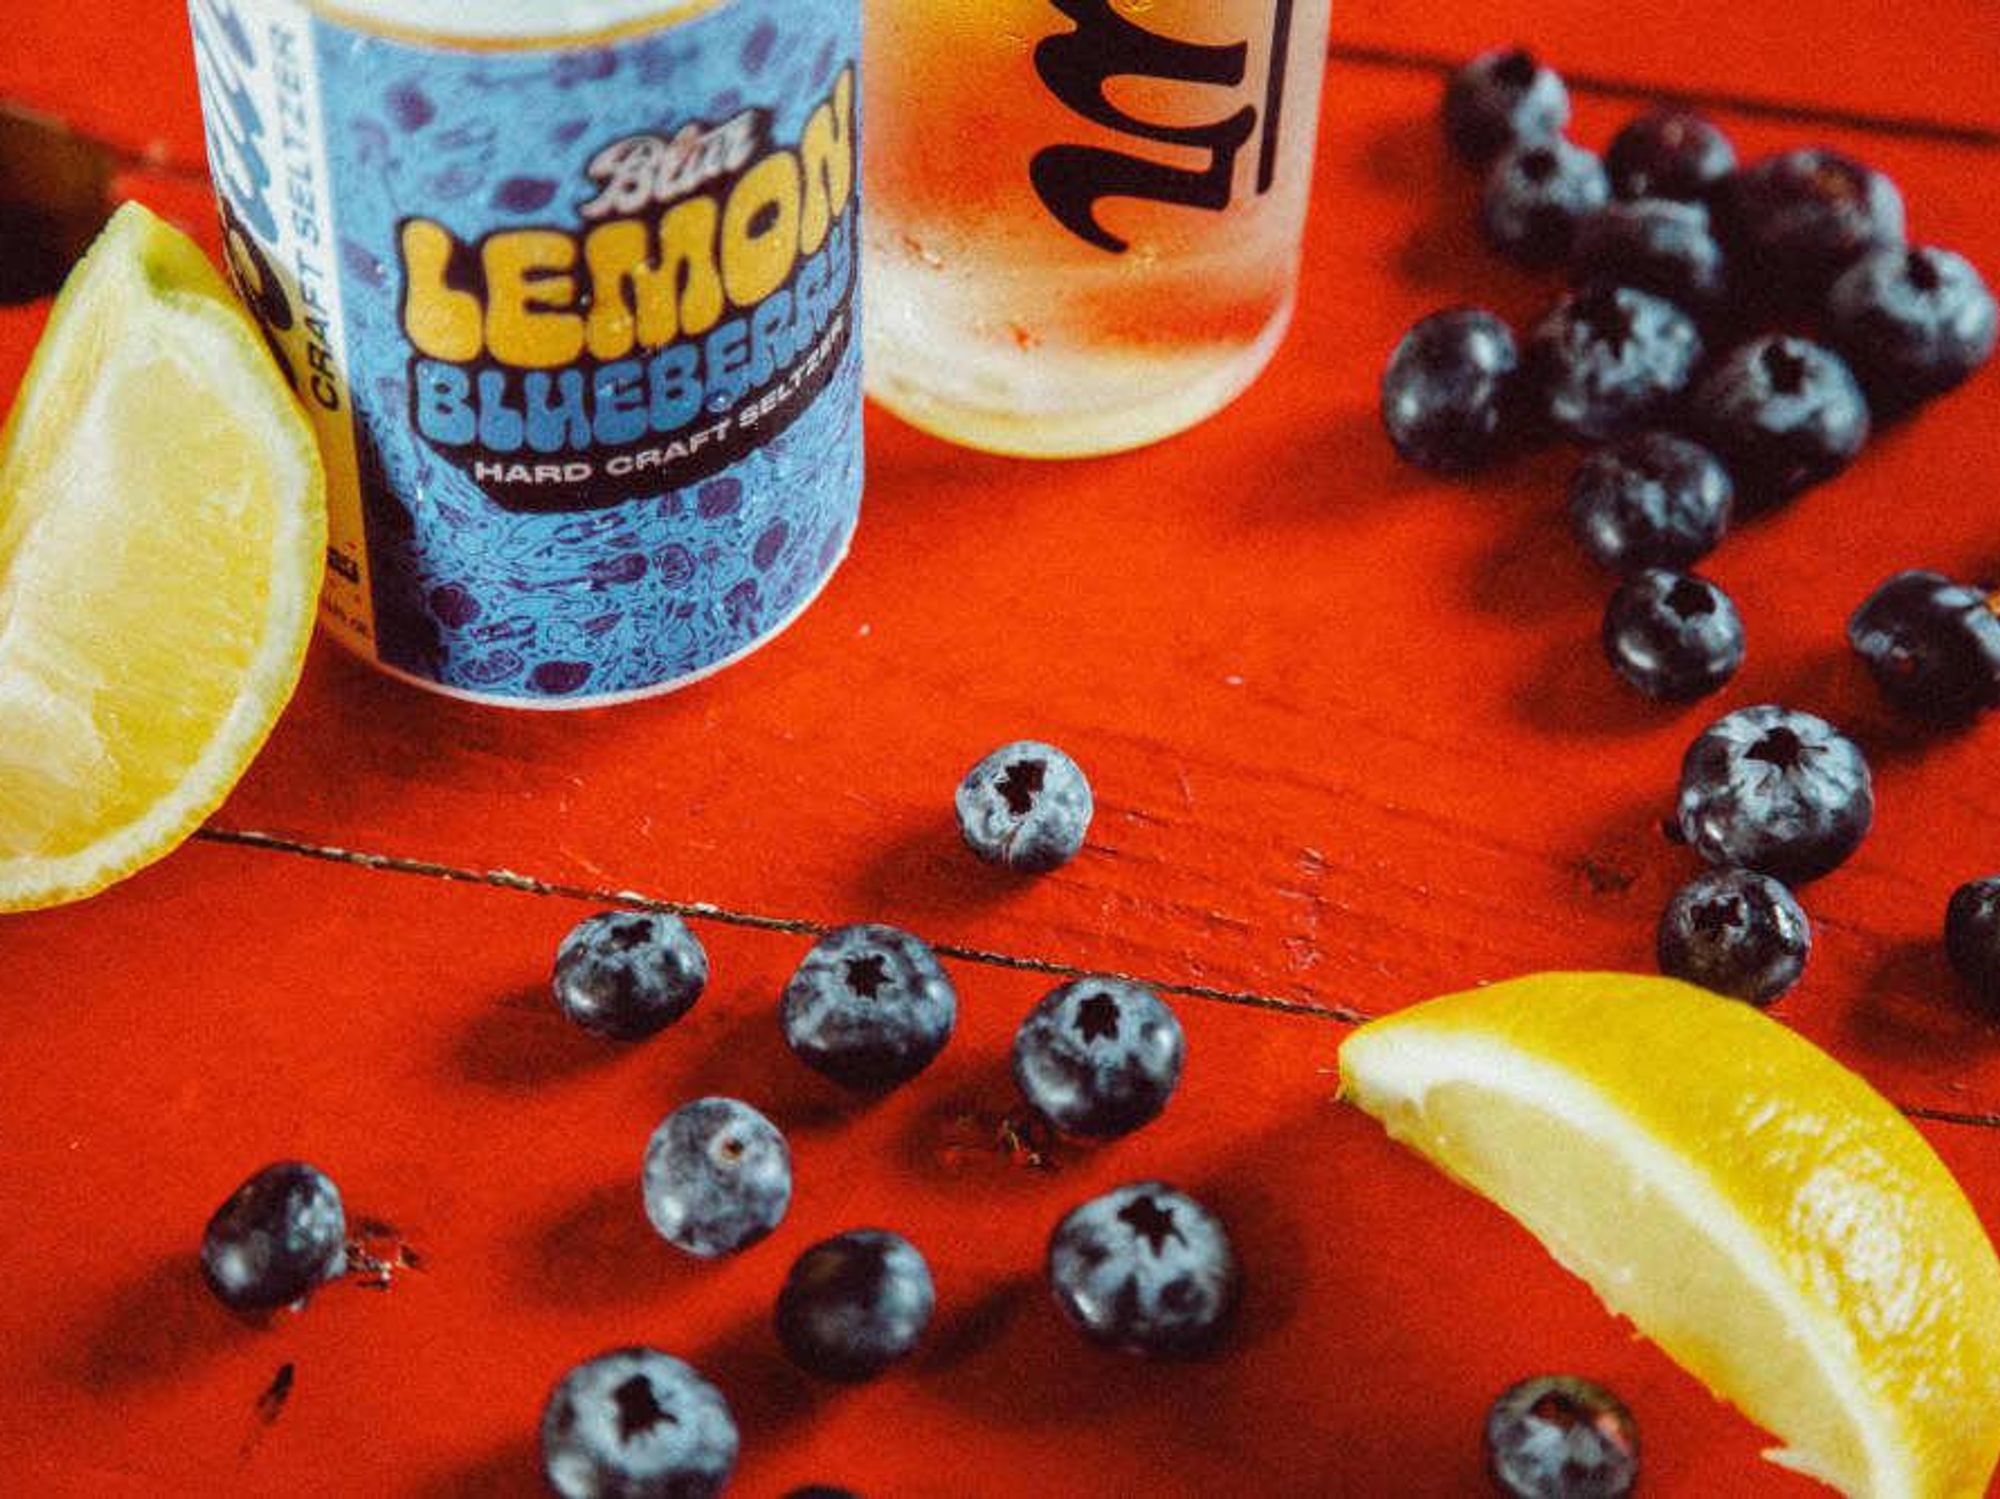 Lemon Blueberry brings the punch without the calories.